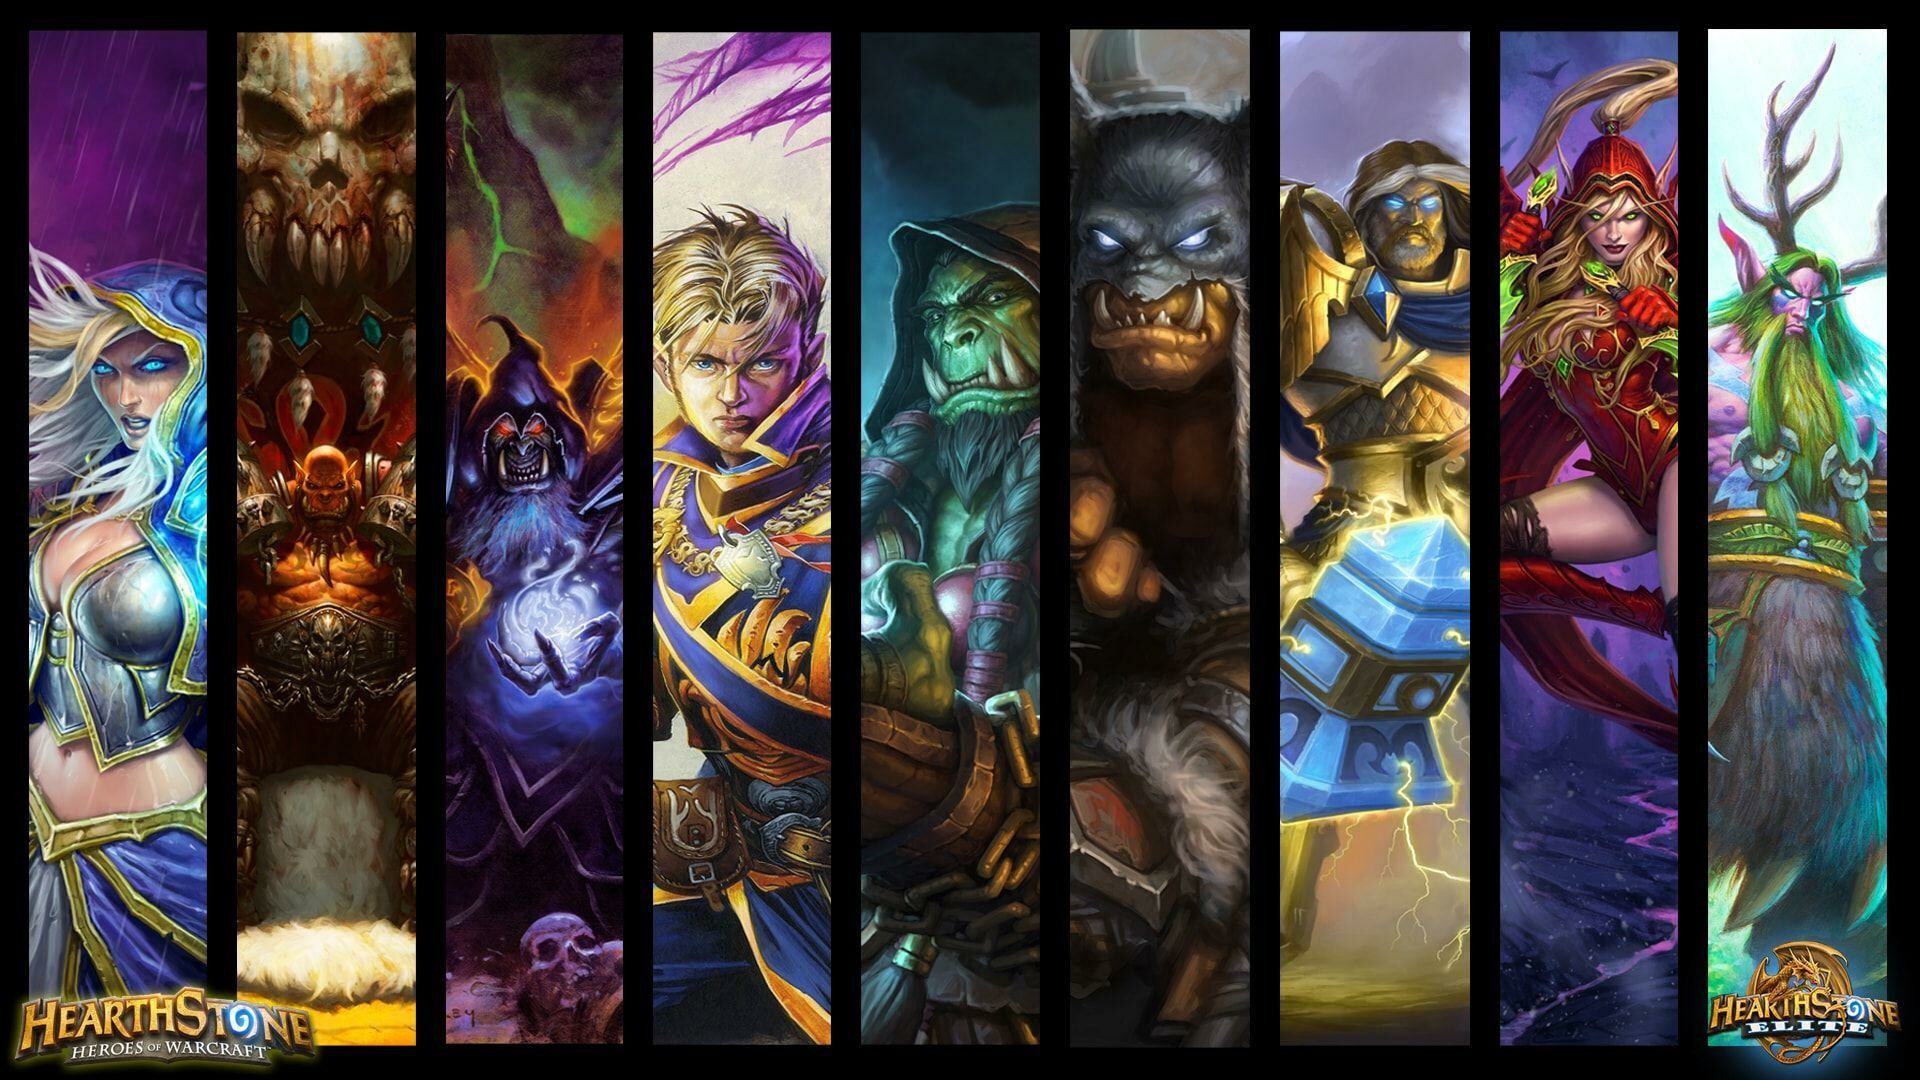 Hearthstone: Set within the Warcraft universe, with its characters, spells, and locations drawing mostly from existing lore, Video game. 1920x1080 Full HD Background.